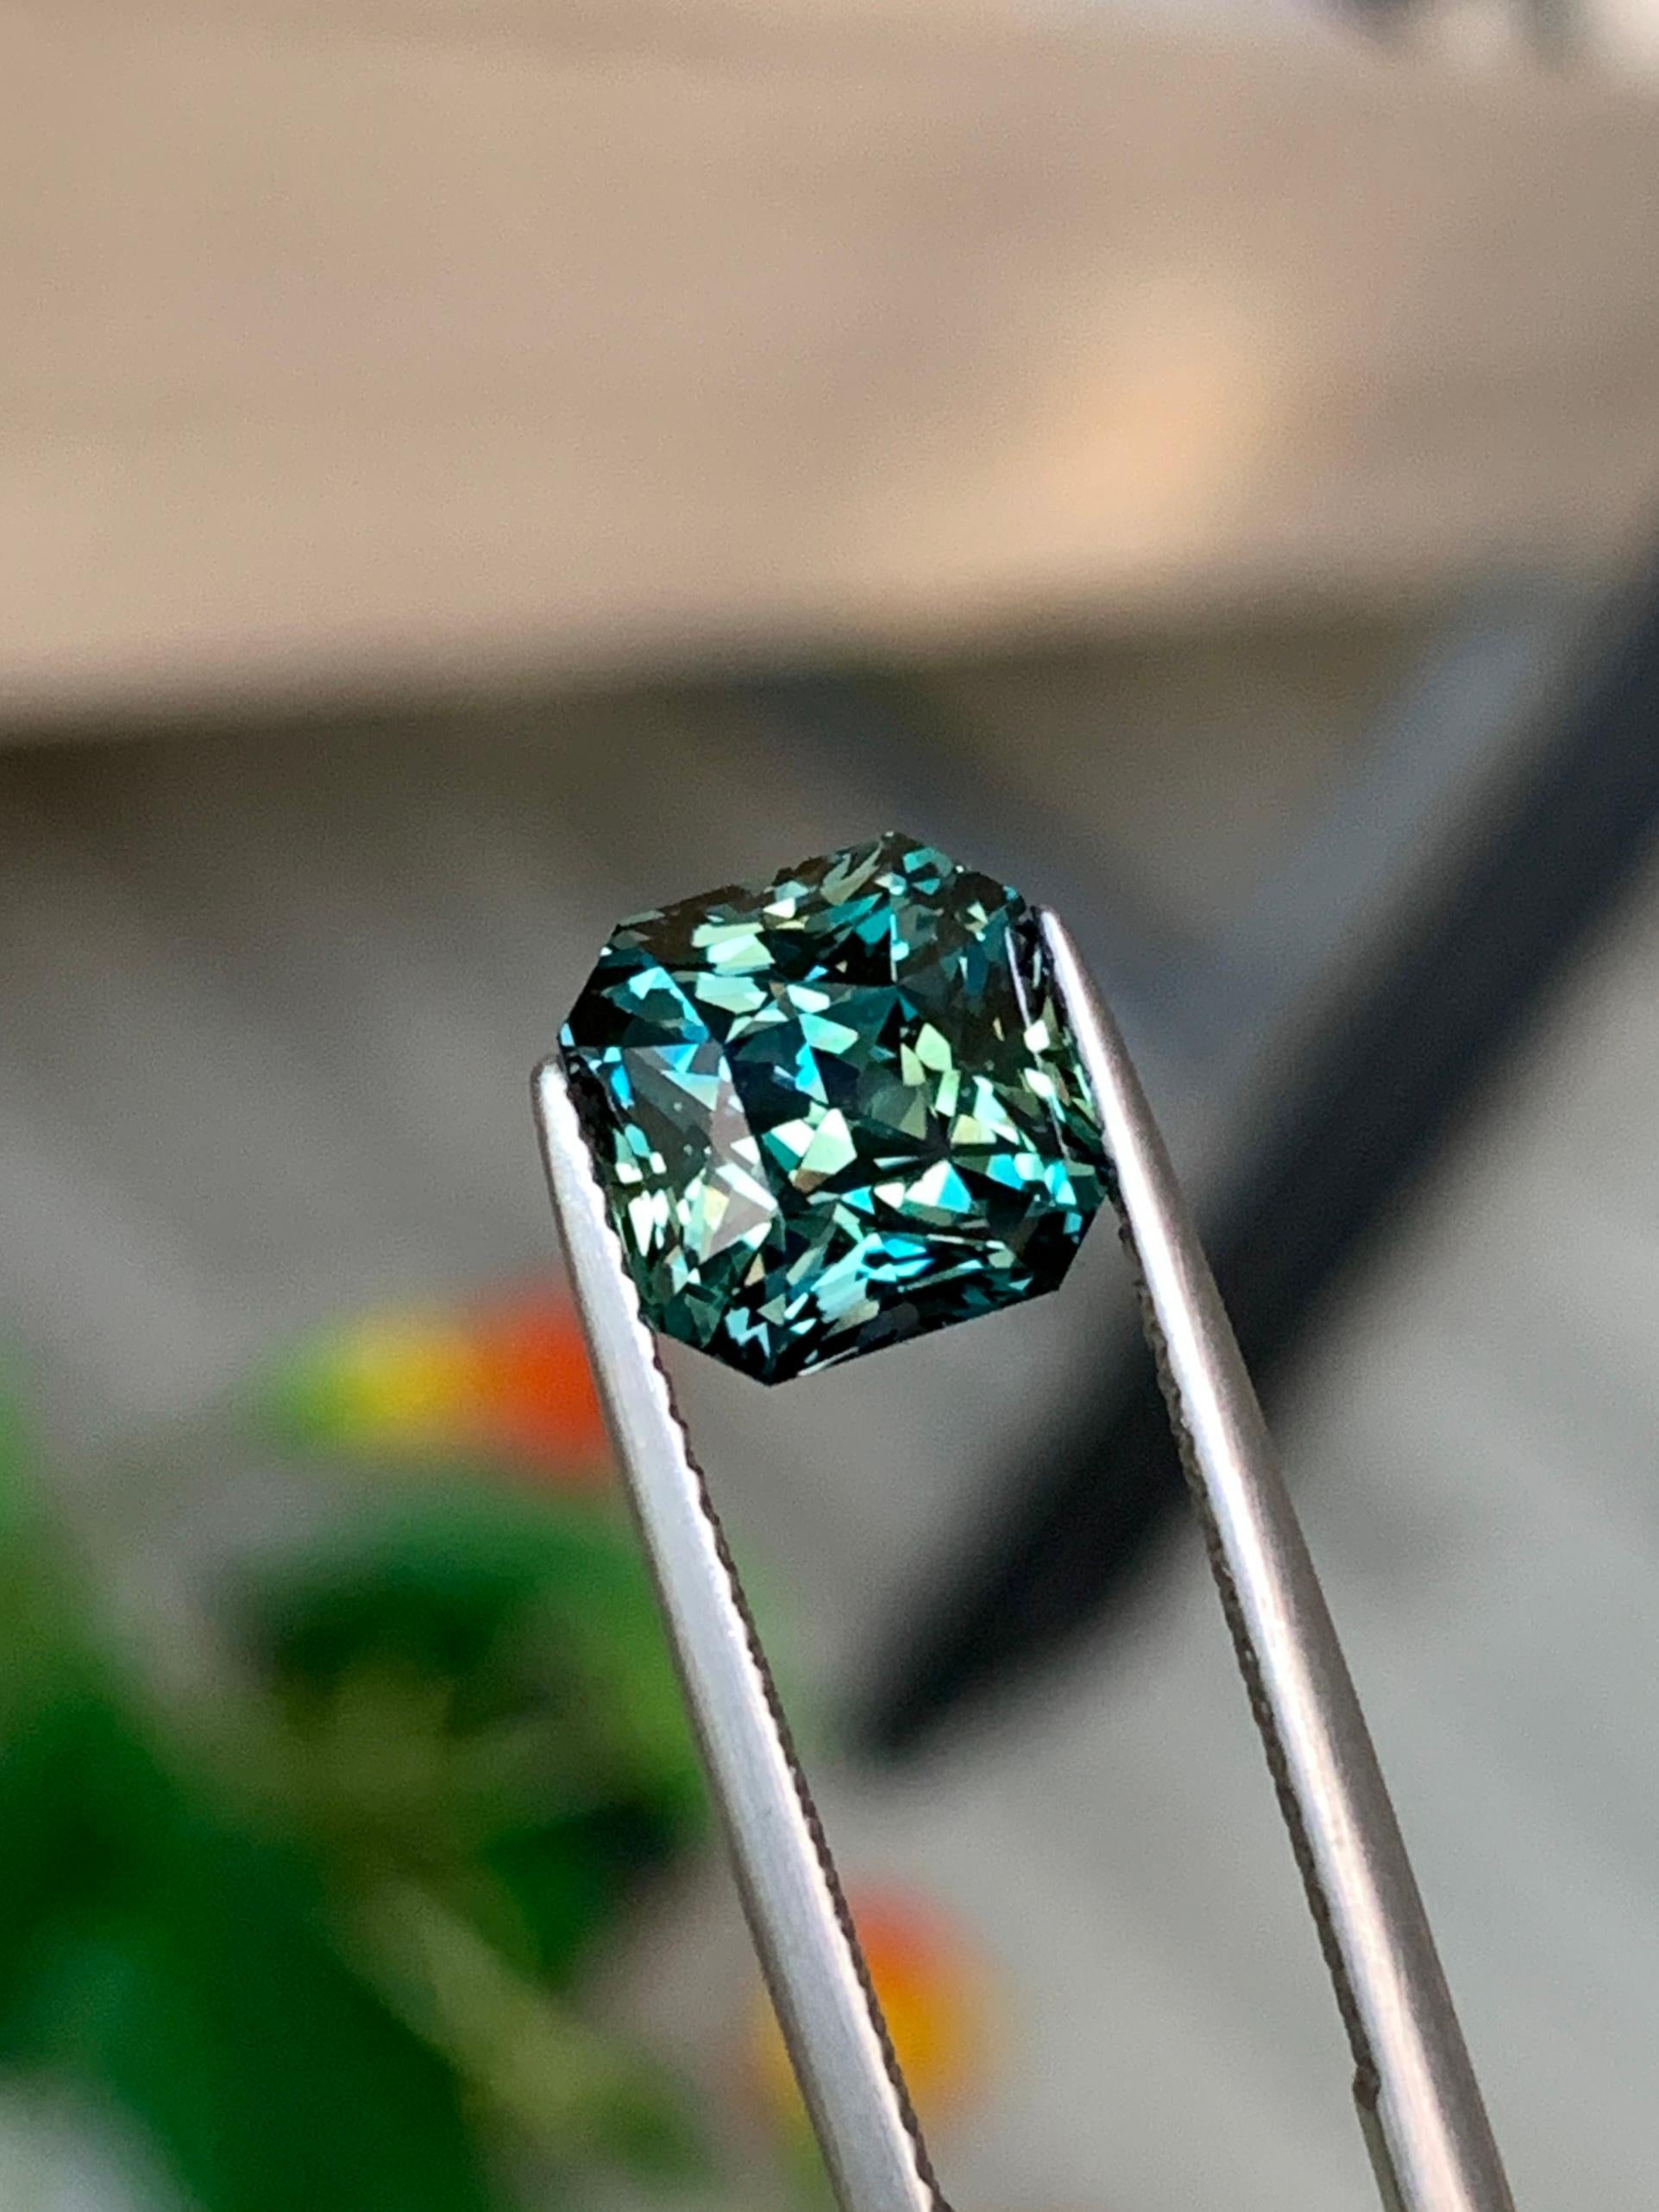 ITEM DESCRIPTION: 
Gem type :  Natural Sapphire
Origin: Madagascar
Treatment: Unheated 
Color: Teal
shape: Octagonal 
Size:  5.19 Carats


Teal unheated sapphires are a rare and unique variety of sapphire prized for their stunning teal or